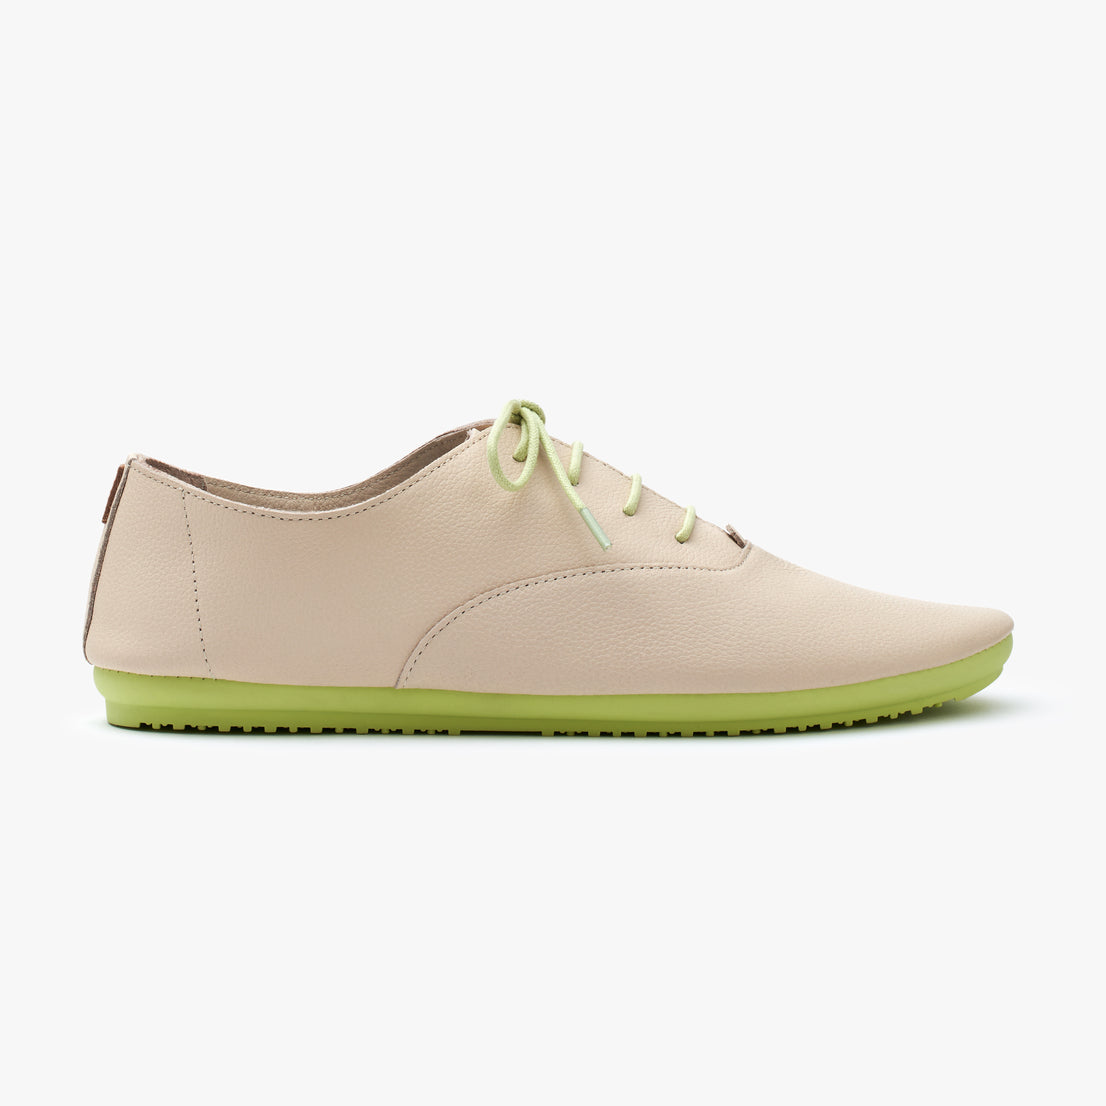 Duo - Nude – INTL Anothersole | Best Everyday Shoes